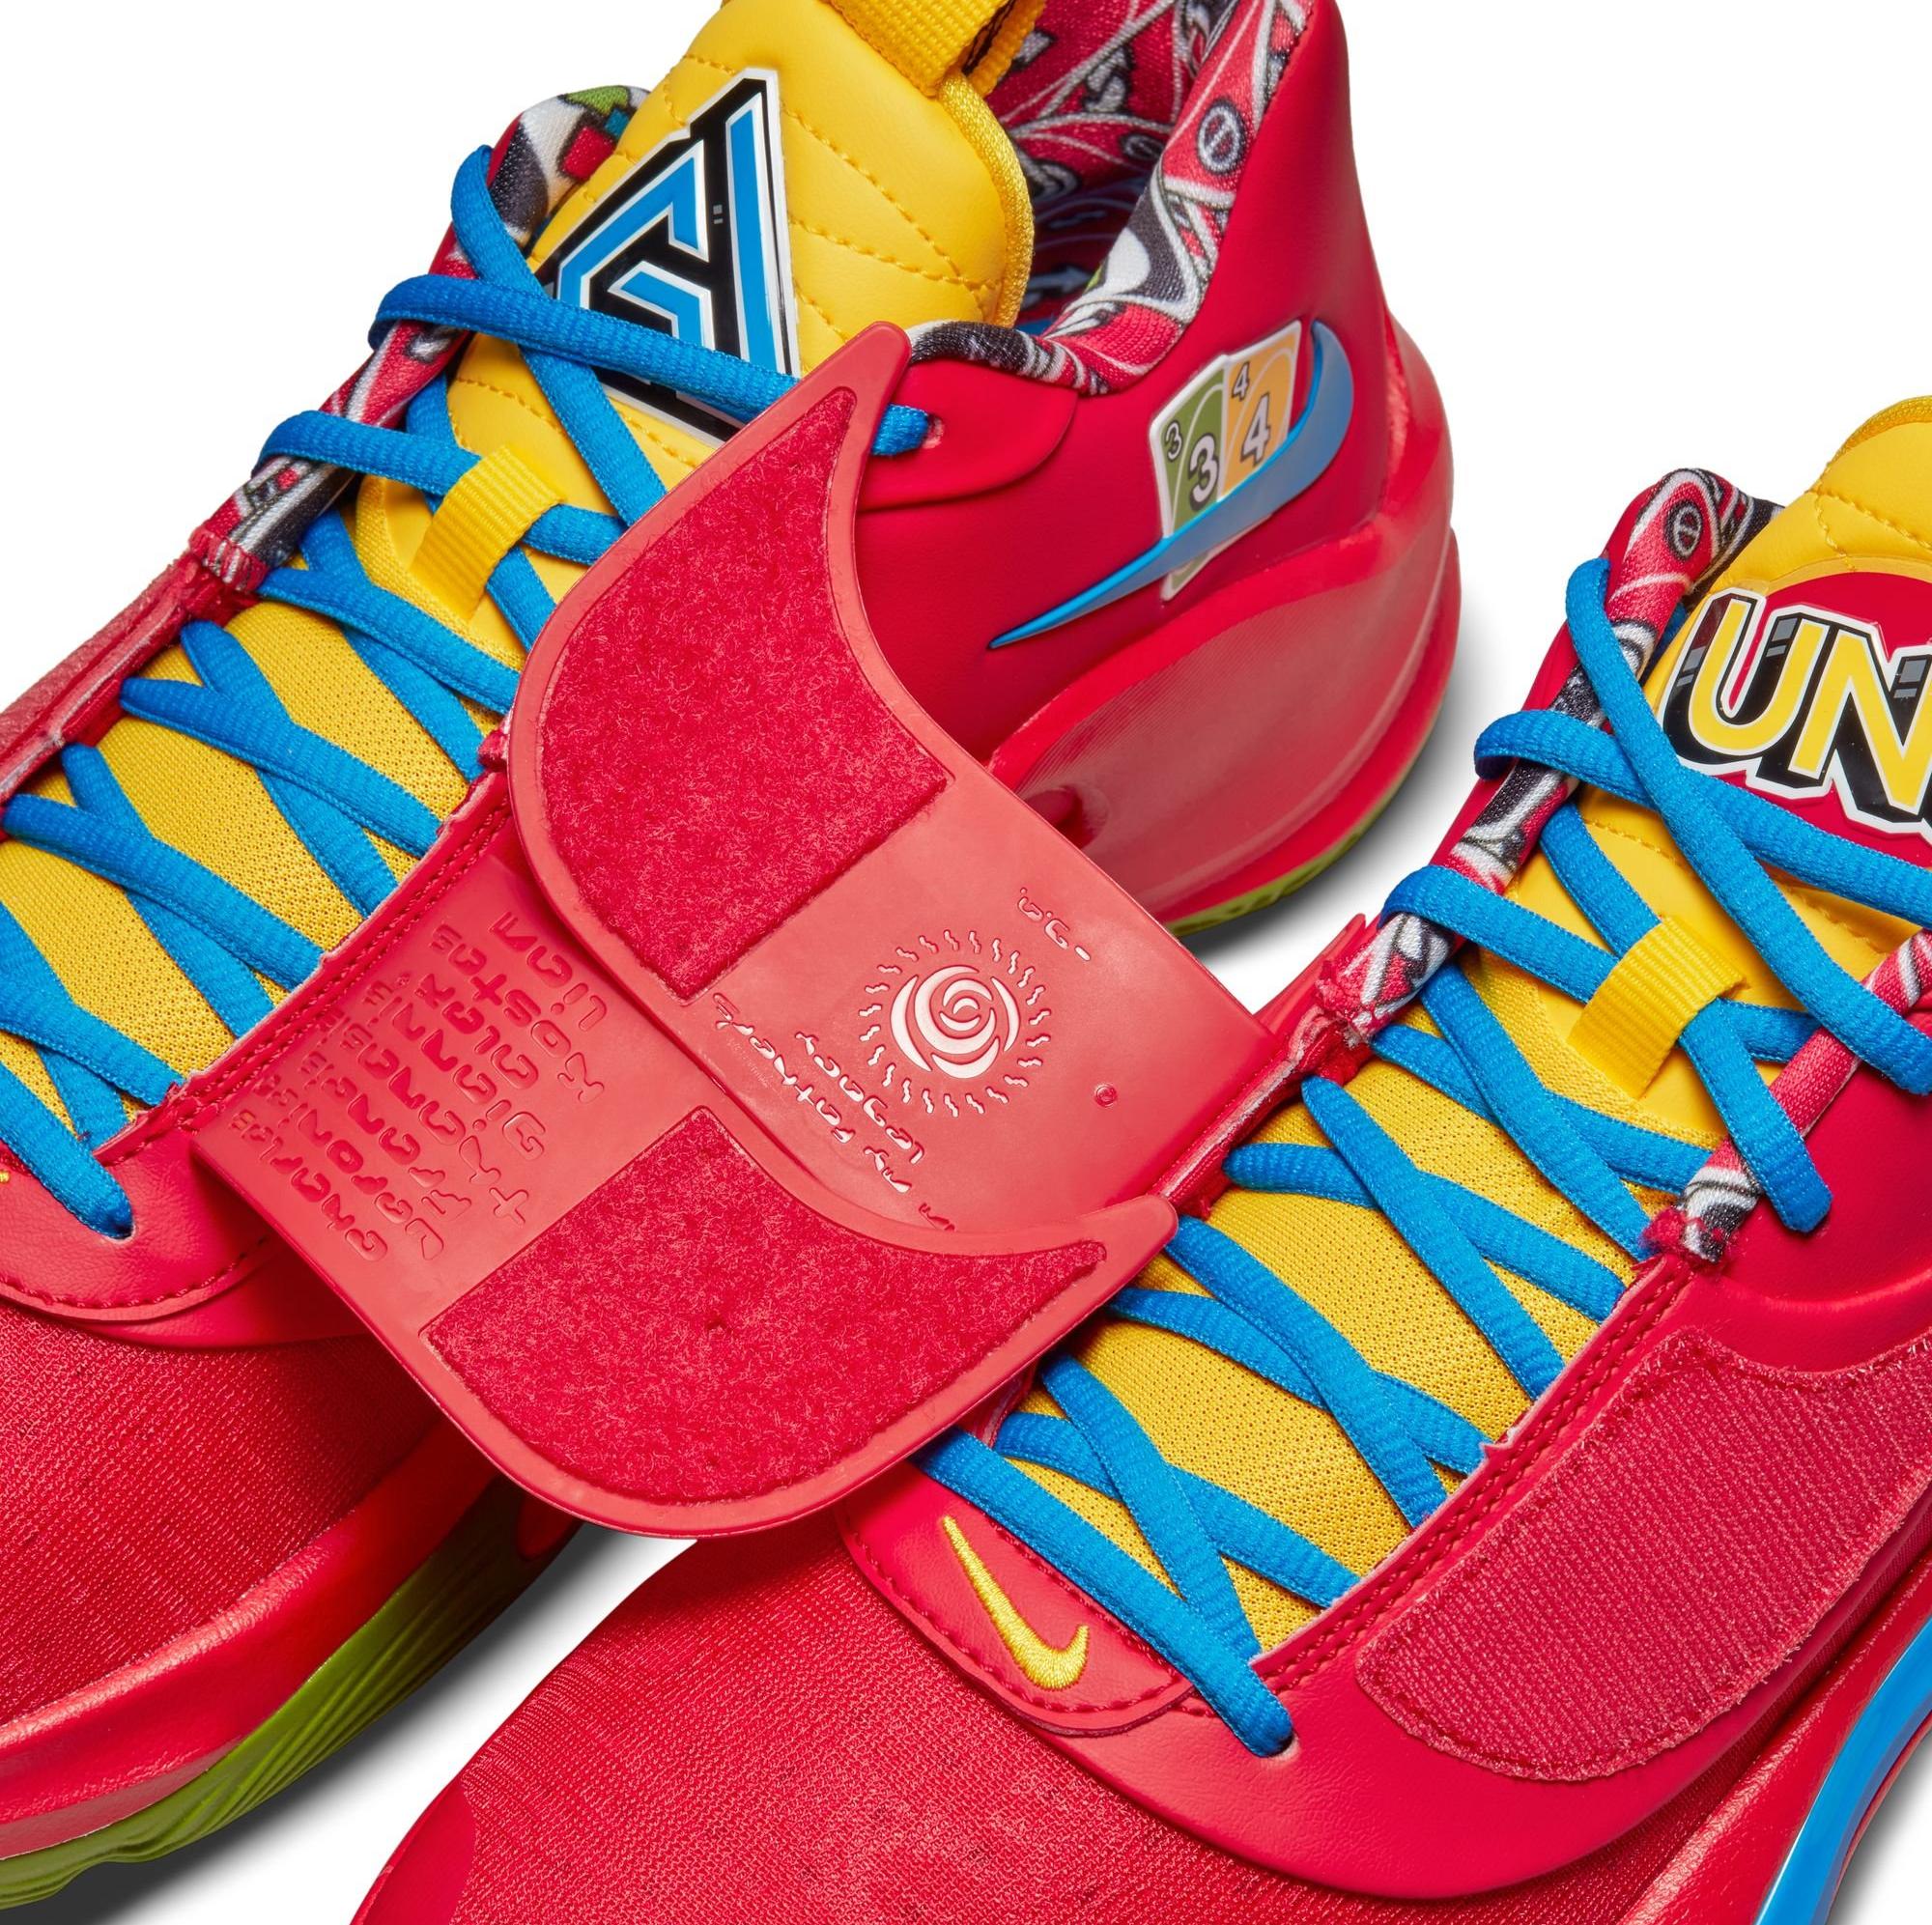 Official Look At The UNO x Nike Zoom Freak 3 Pack - Sneaker News